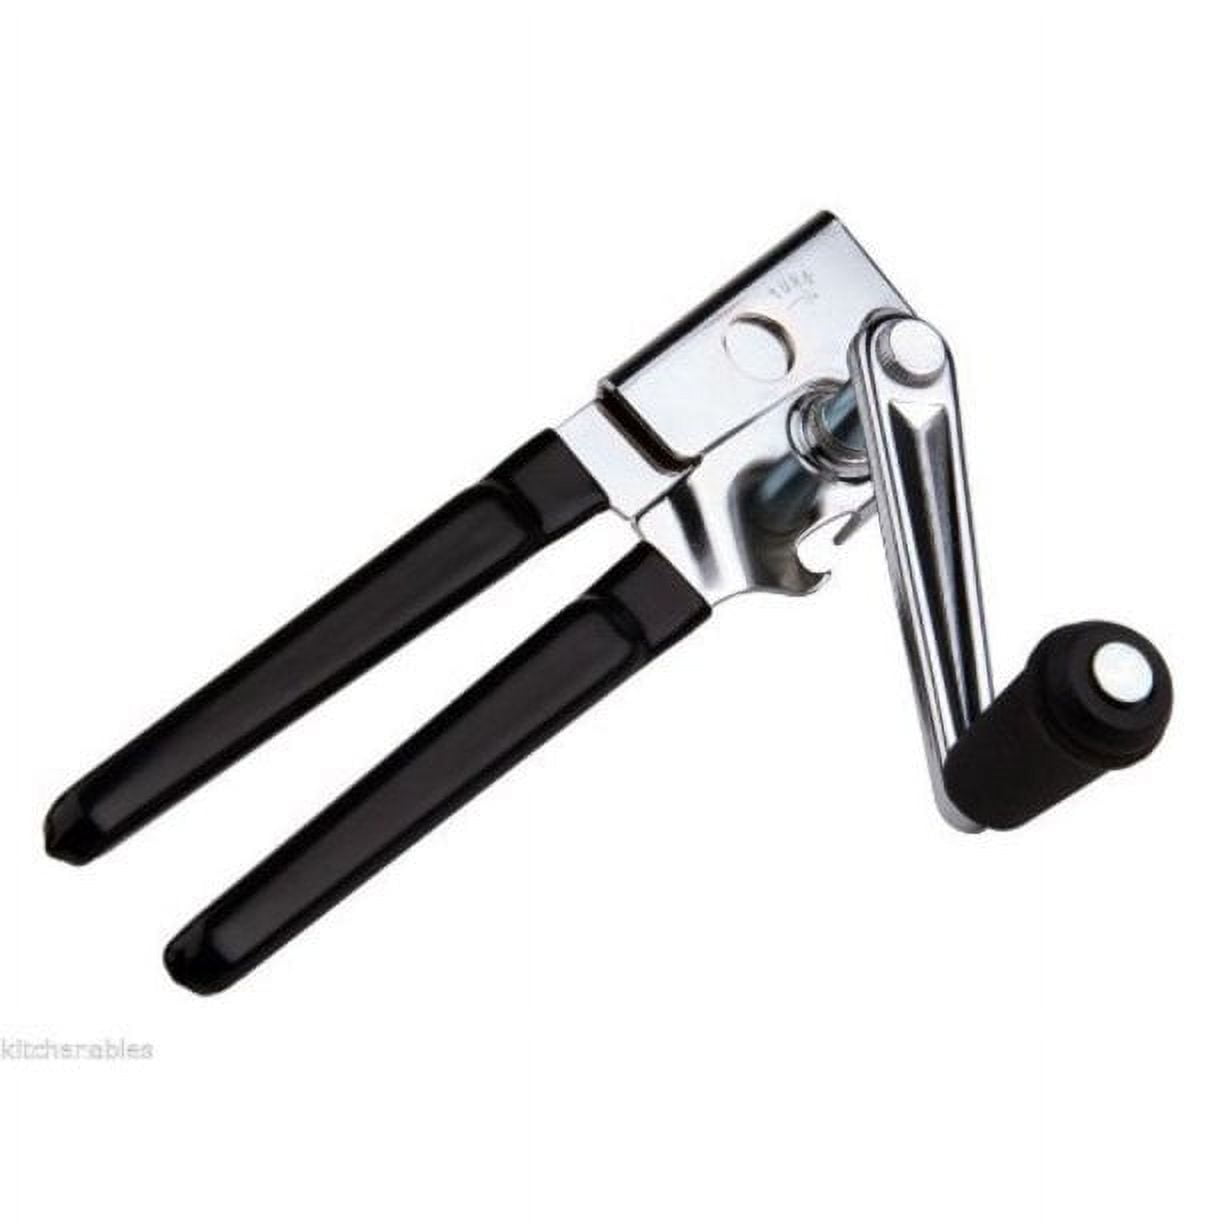 West Bend Company 6080 Crank Can Opener Foldng Handle